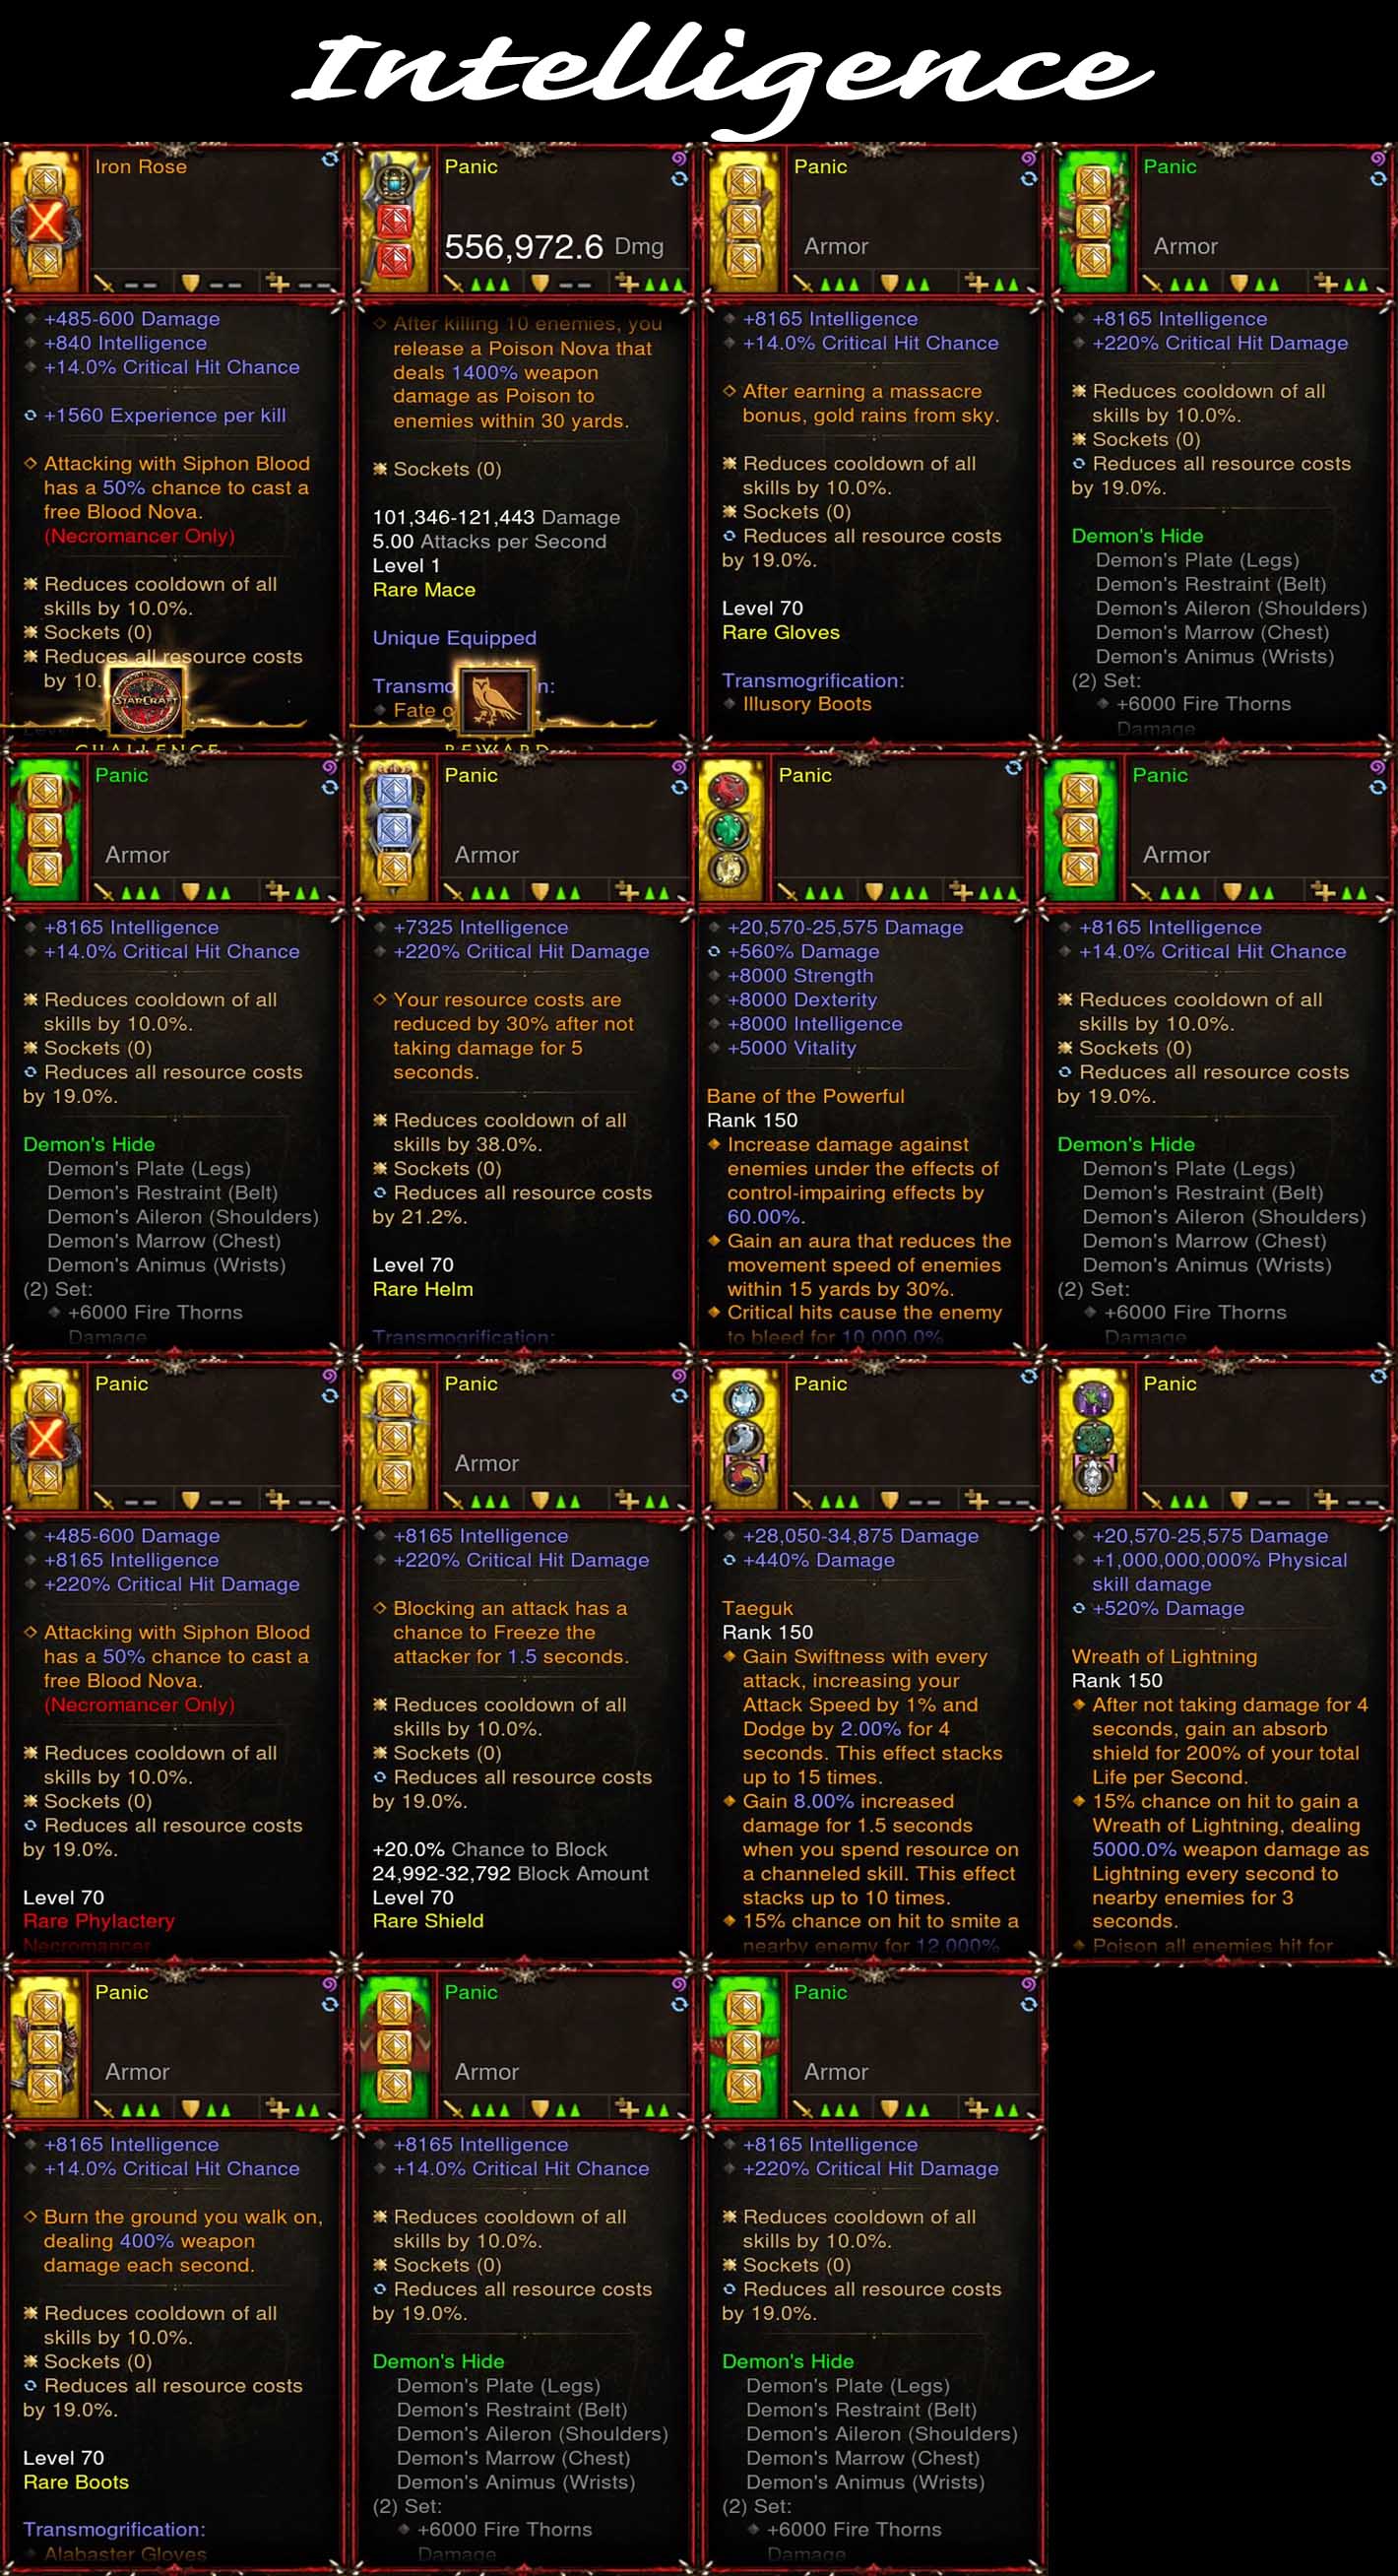 [Primal Ancient][Quad DPS] Demon Hide Set Panic For gRift 150 Diablo 3 Mods ROS Seasonal and Non Seasonal Save Mod - Modded Items and Gear - Hacks - Cheats - Trainers for Playstation 4 - Playstation 5 - Nintendo Switch - Xbox One